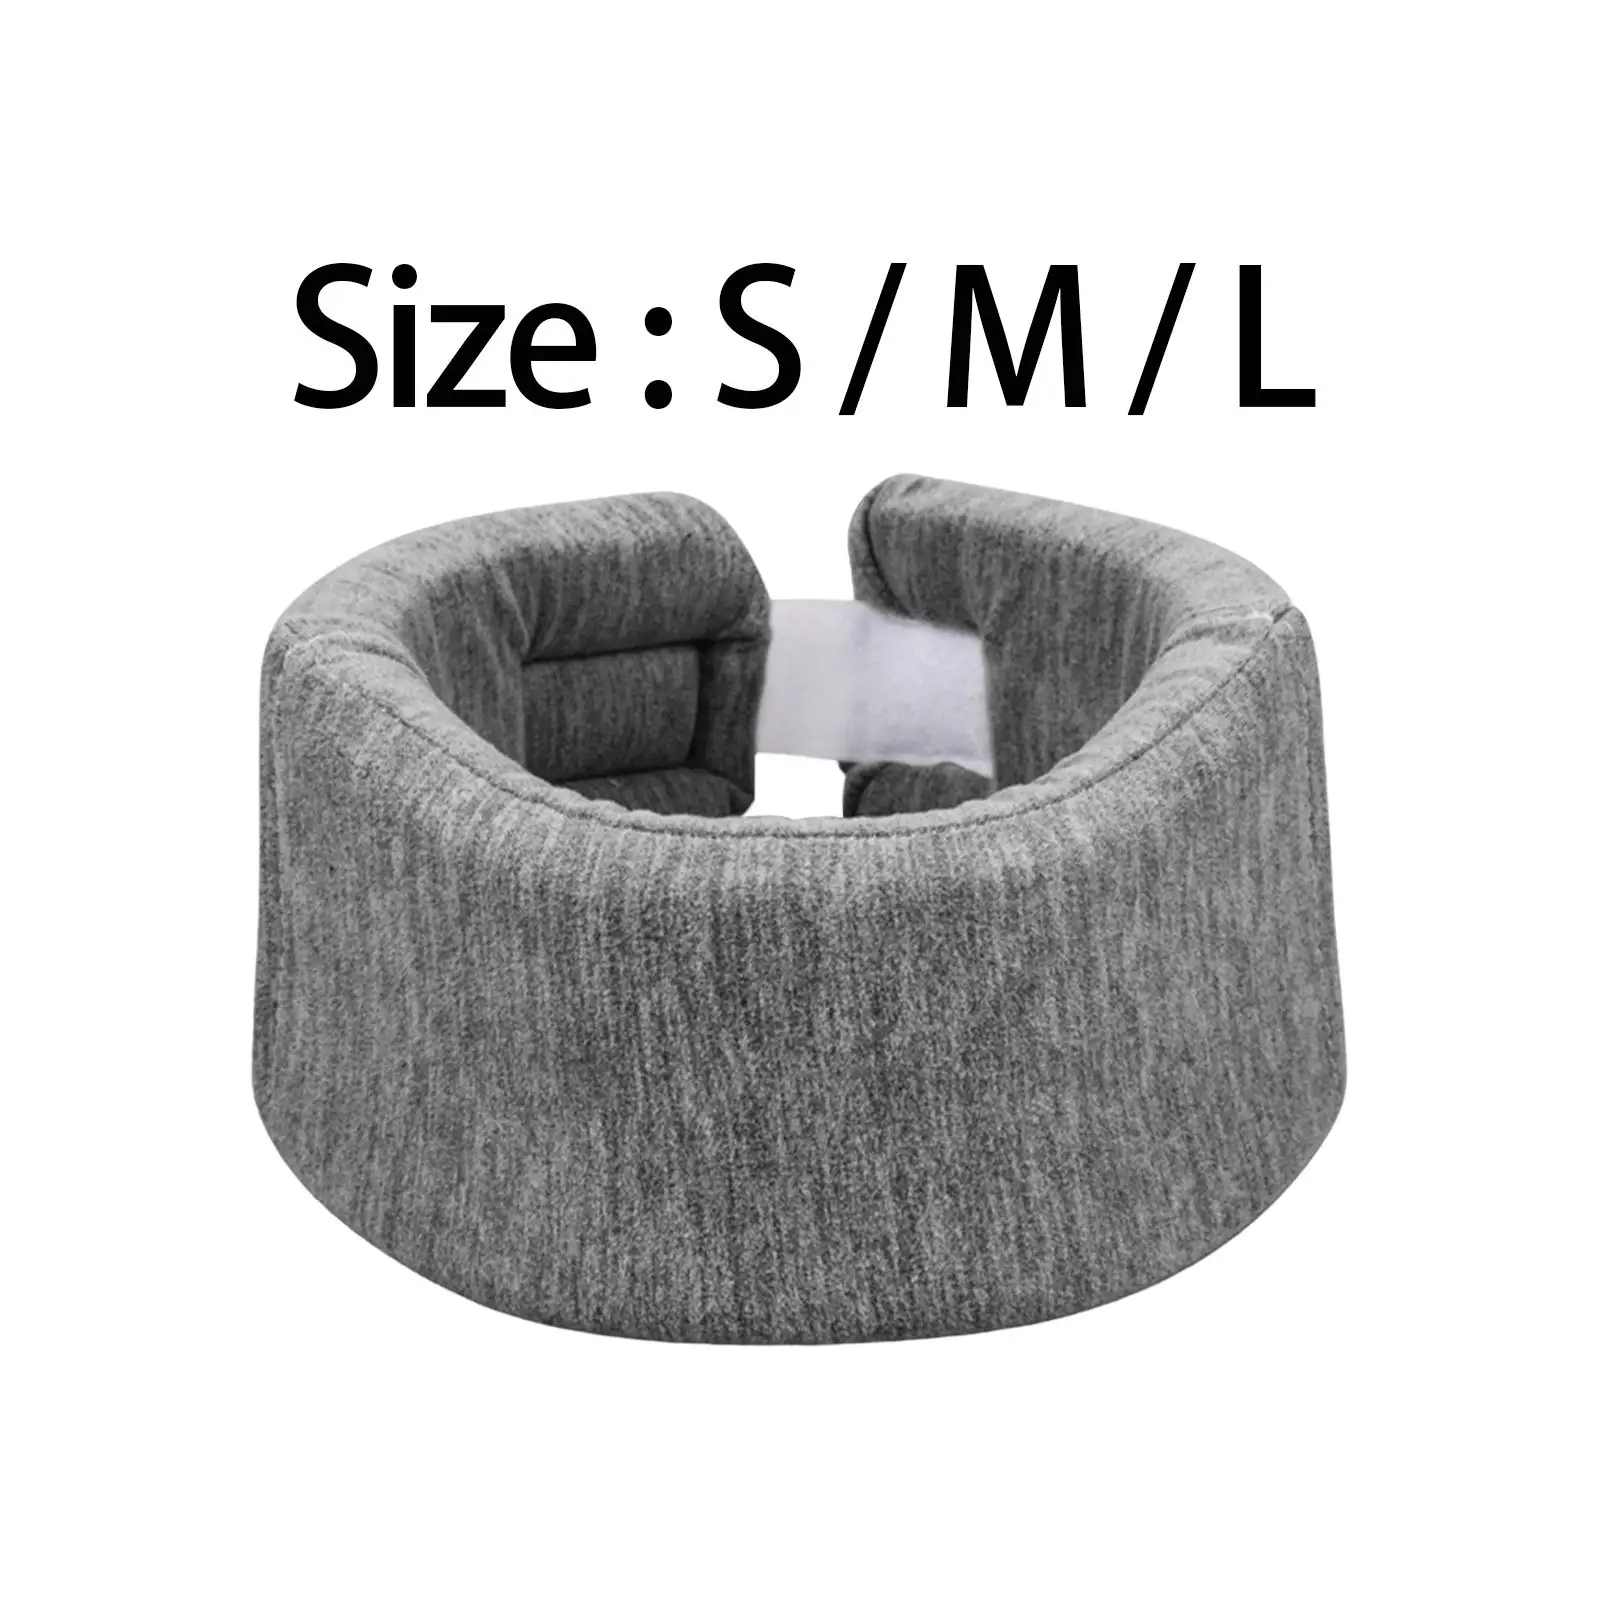 Travel Pillow Portable Machine Washable Soft Neck Pillow for Traveling on Airplane for Plane Neck Support Car Travel